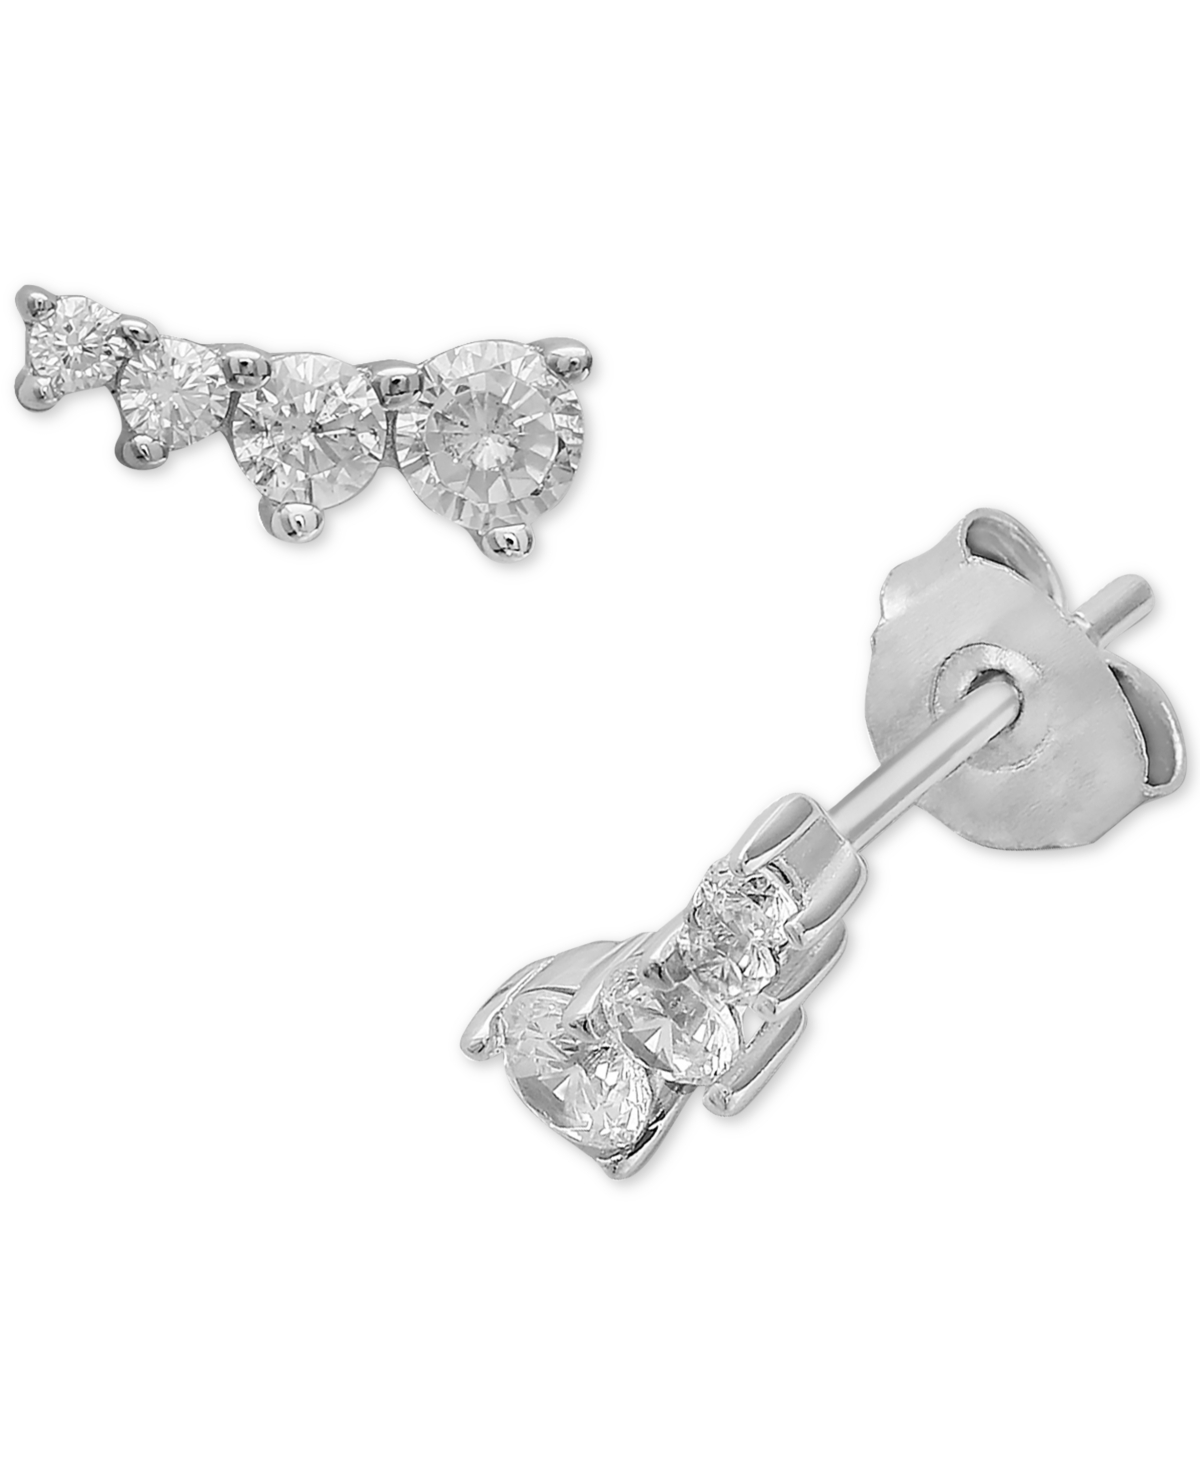 Cubic Zirconia Ear Climbers in Sterling Silver, Created for Macy's - Sterling Silver